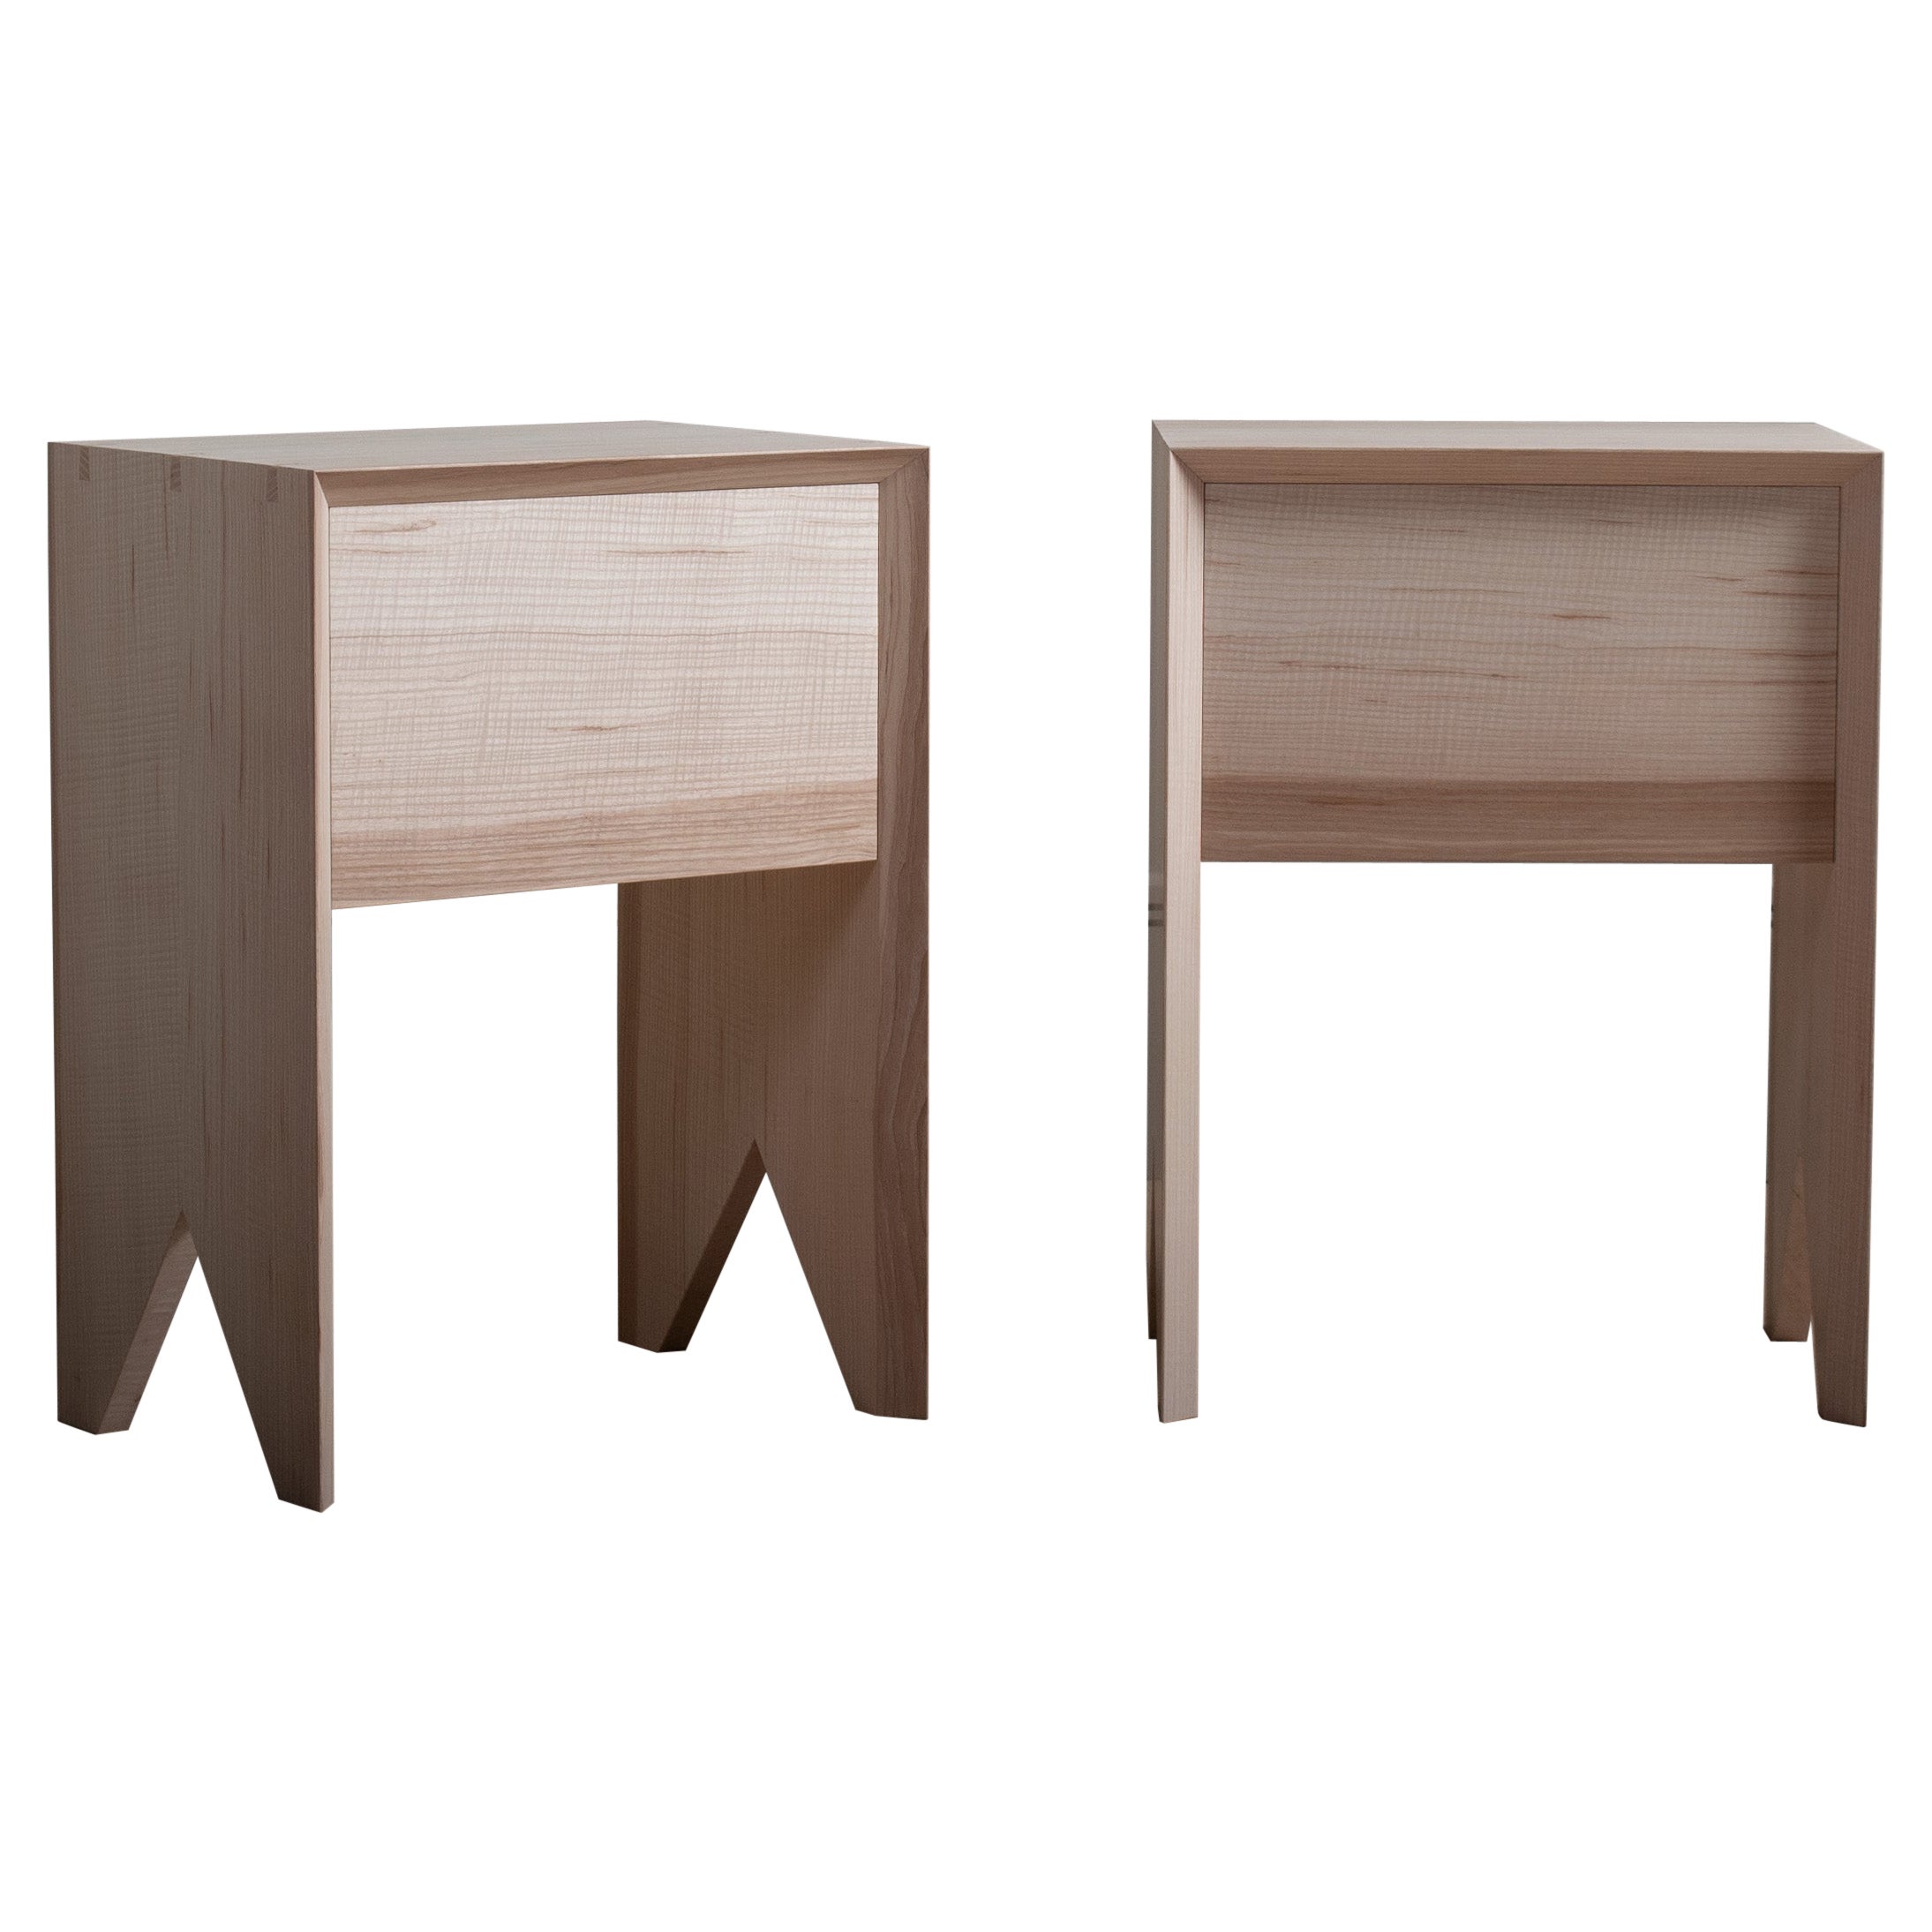 Pair of Handcrafted English Ash End Tables / Drawers.